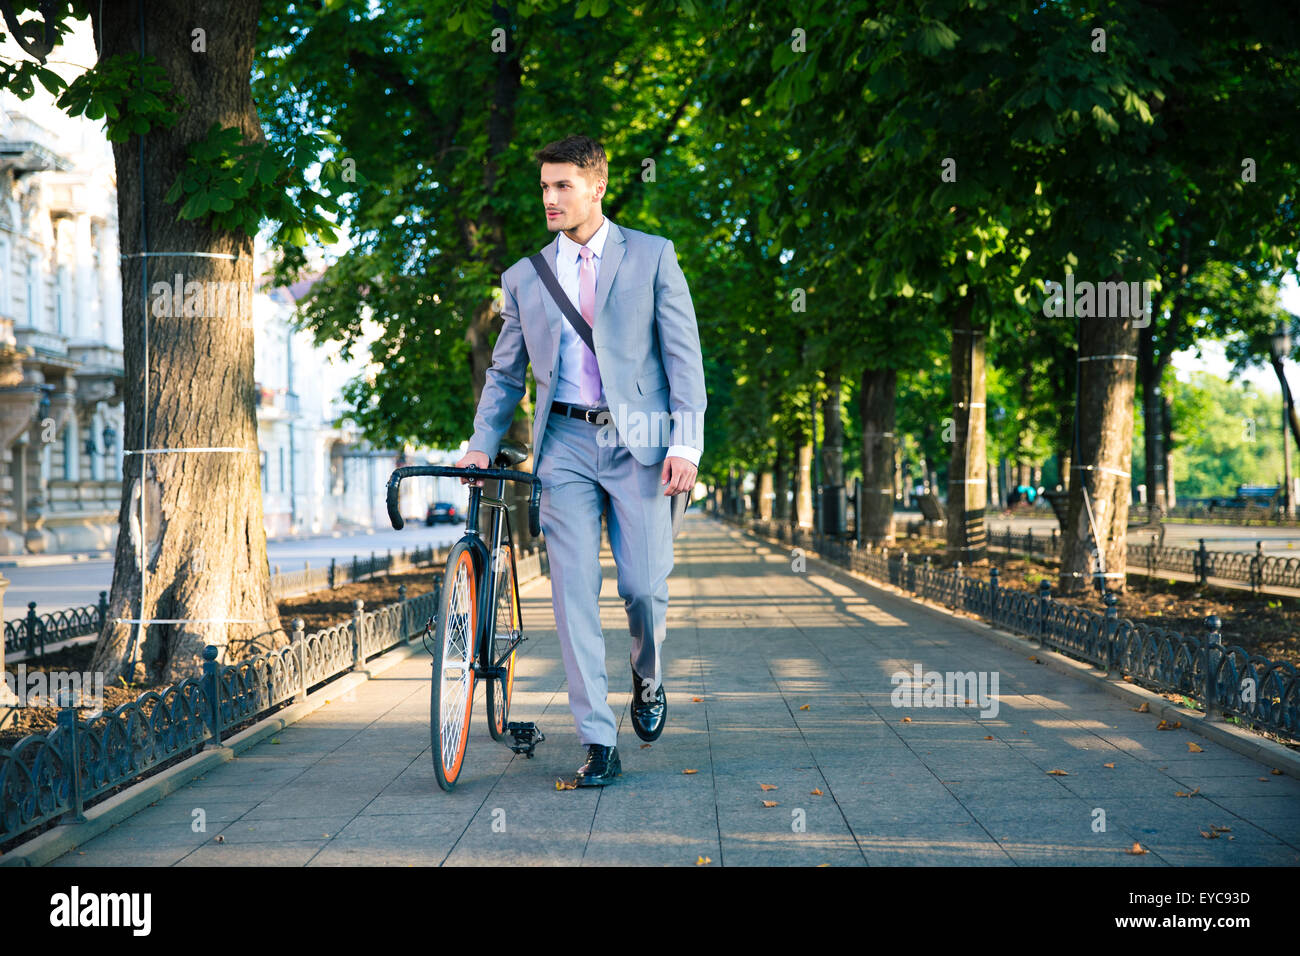 Handsome businessman walking with bicycle on the street in town Stock Photo